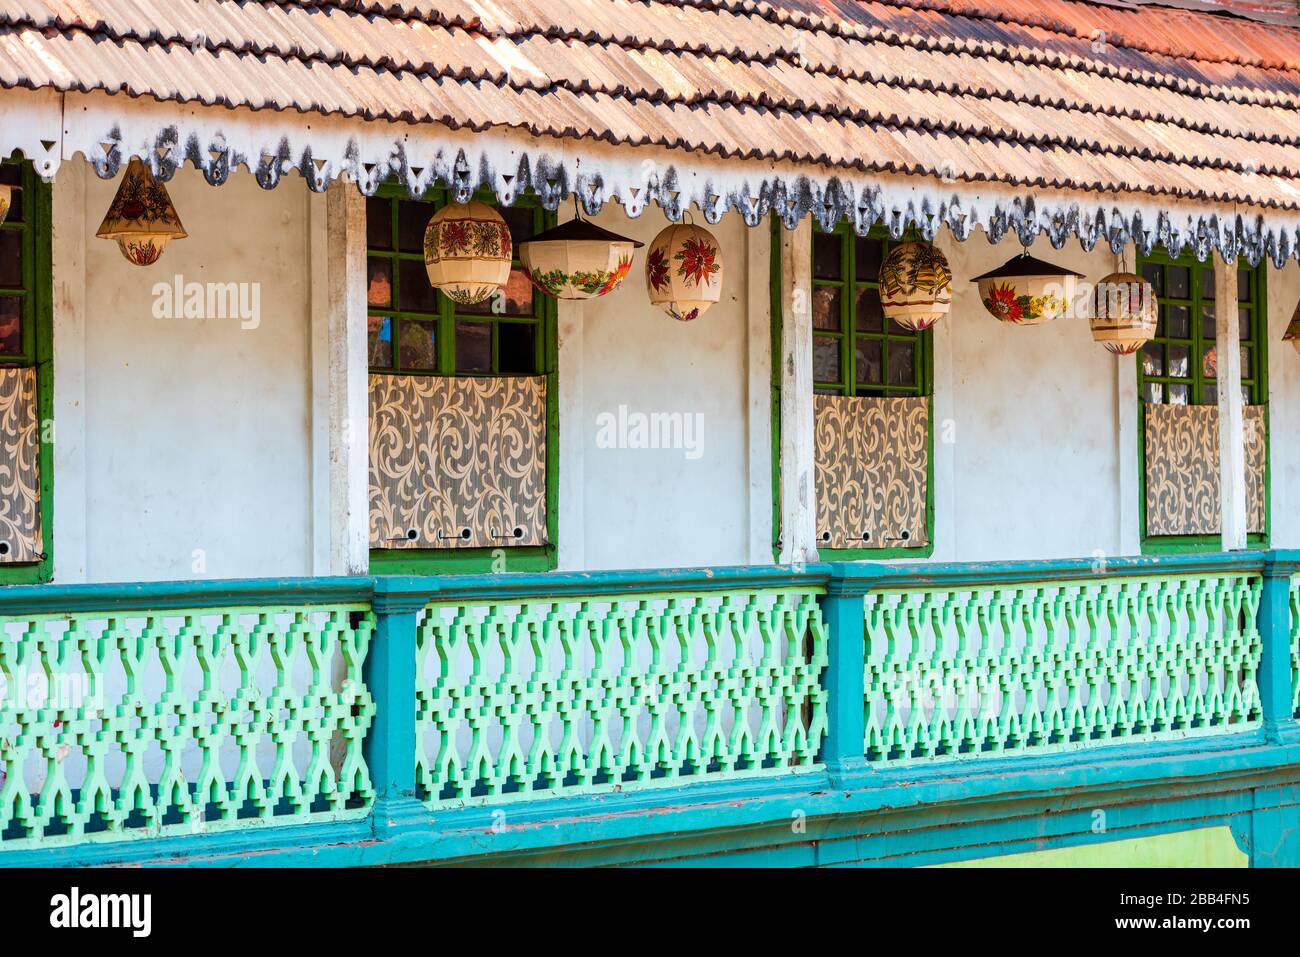 Old post-colonial buildings Goa in Margao charming facades ornate walls moldy walls columns balustrades balusters and railings trip to Catholic India Stock Photo